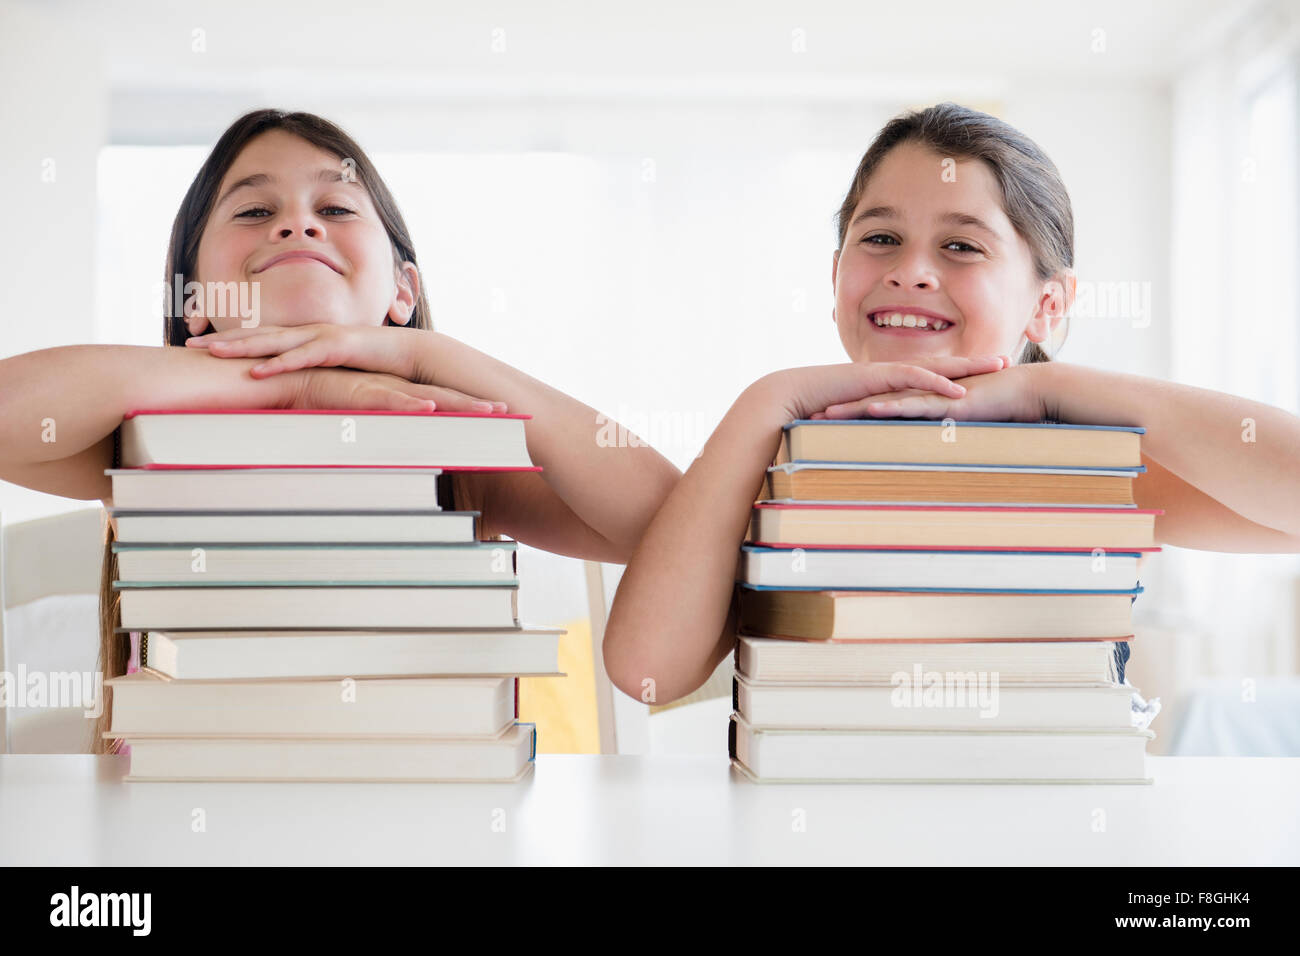 Caucasian twin sisters resting on stacks of books Stock Photo